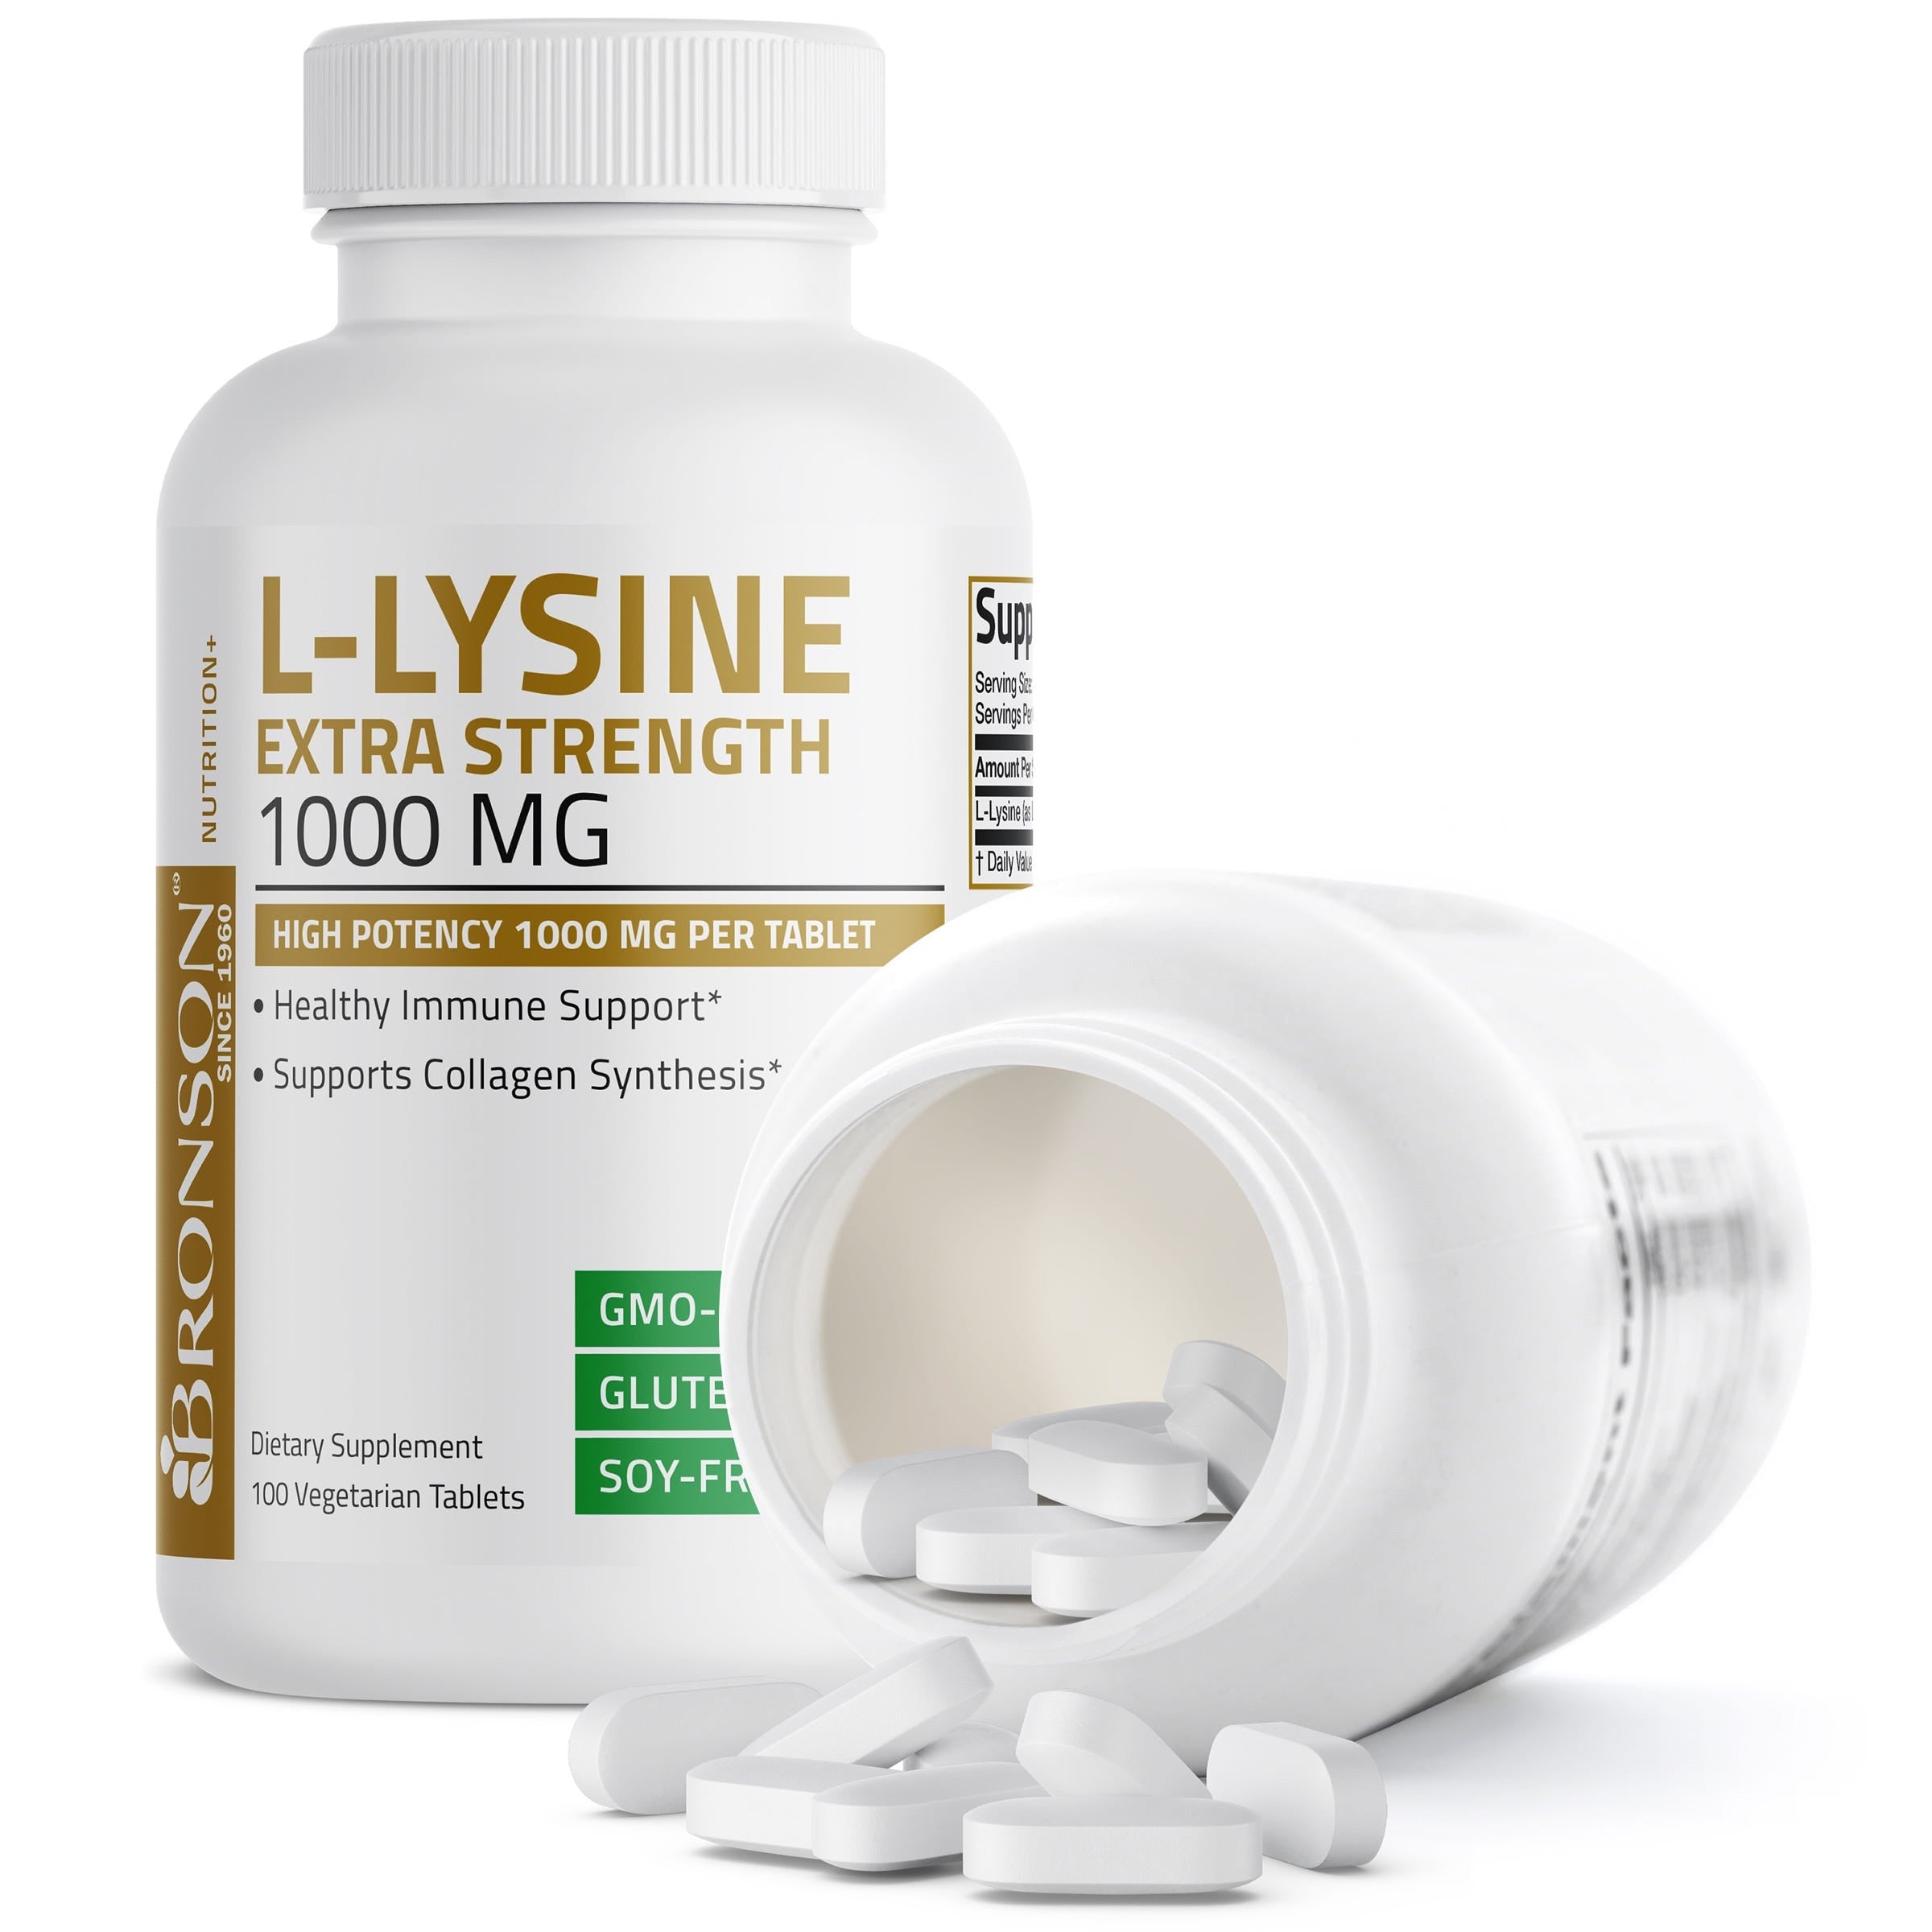 L-Lysine Extra Strength 1,000 MG view 4 of 6